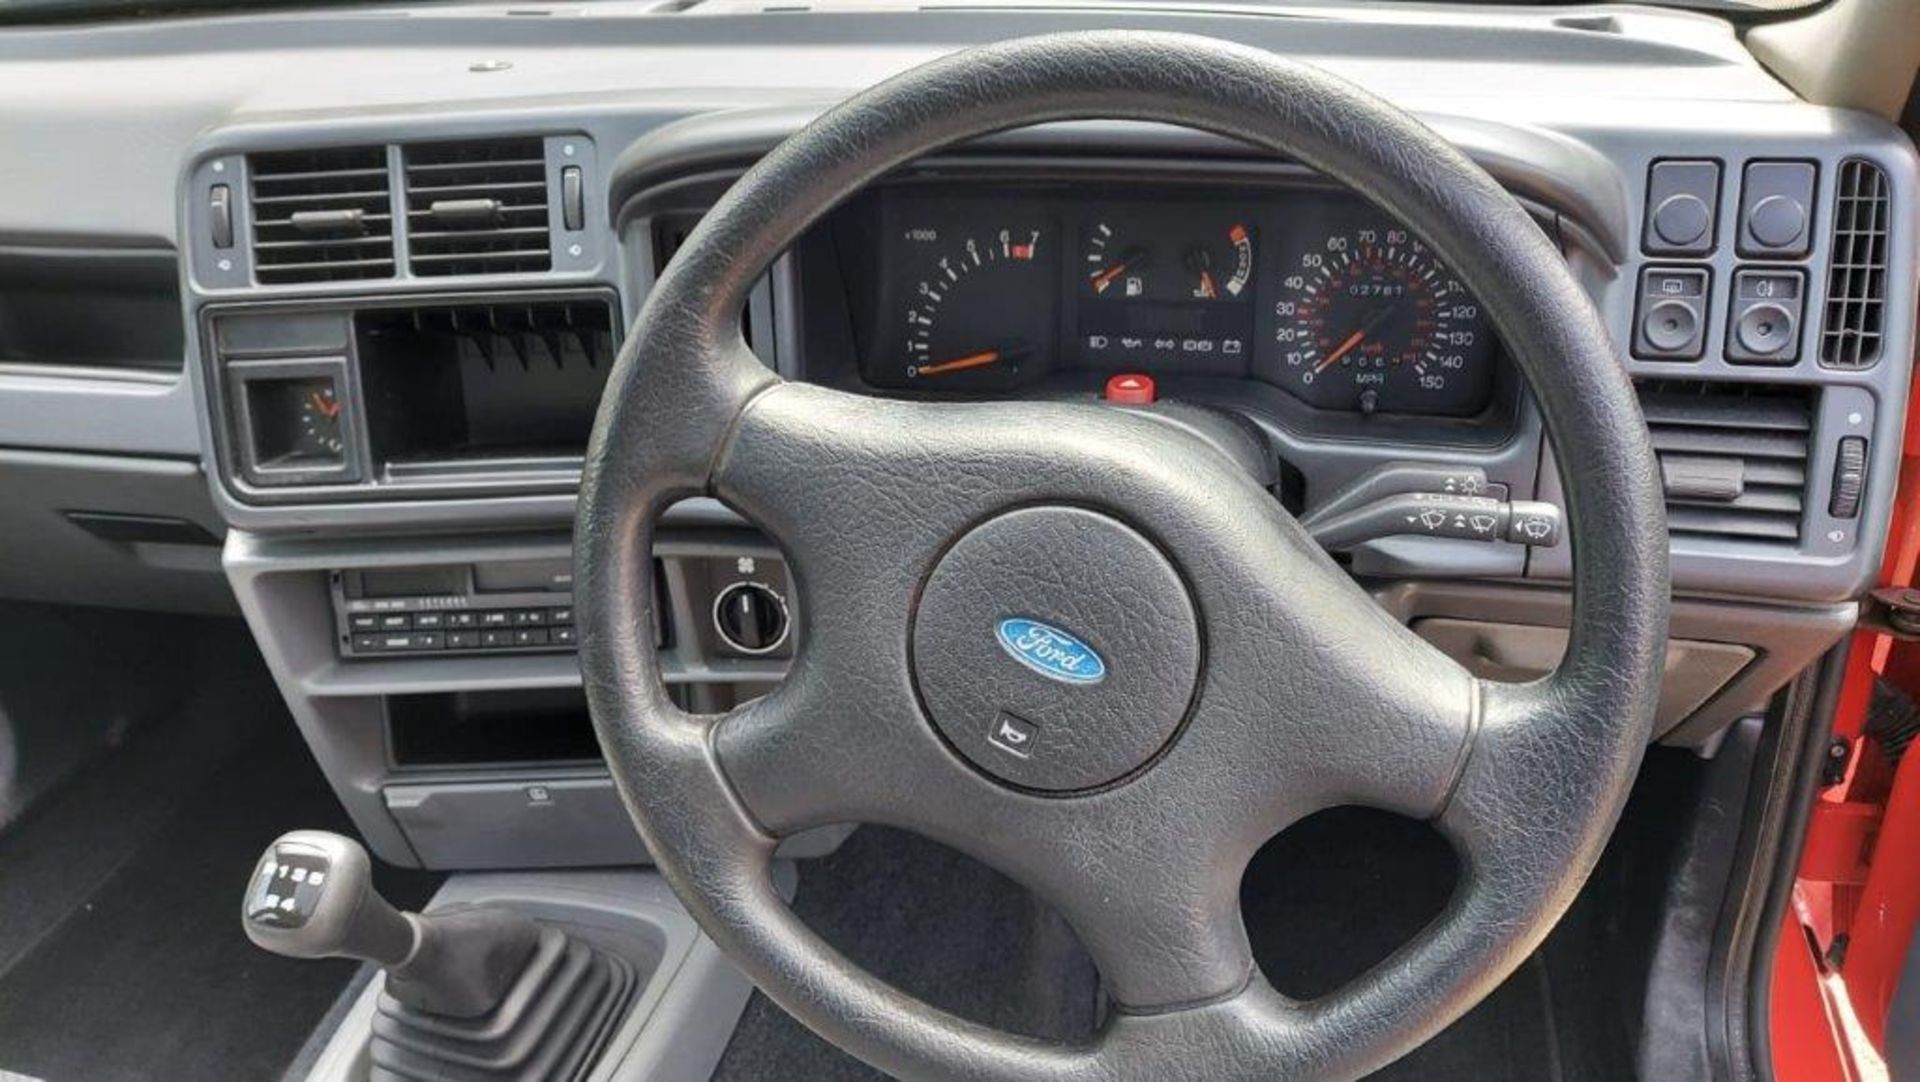 1993 Ford Sierra 1.8 LXi 2,780 miles from new - Image 9 of 20